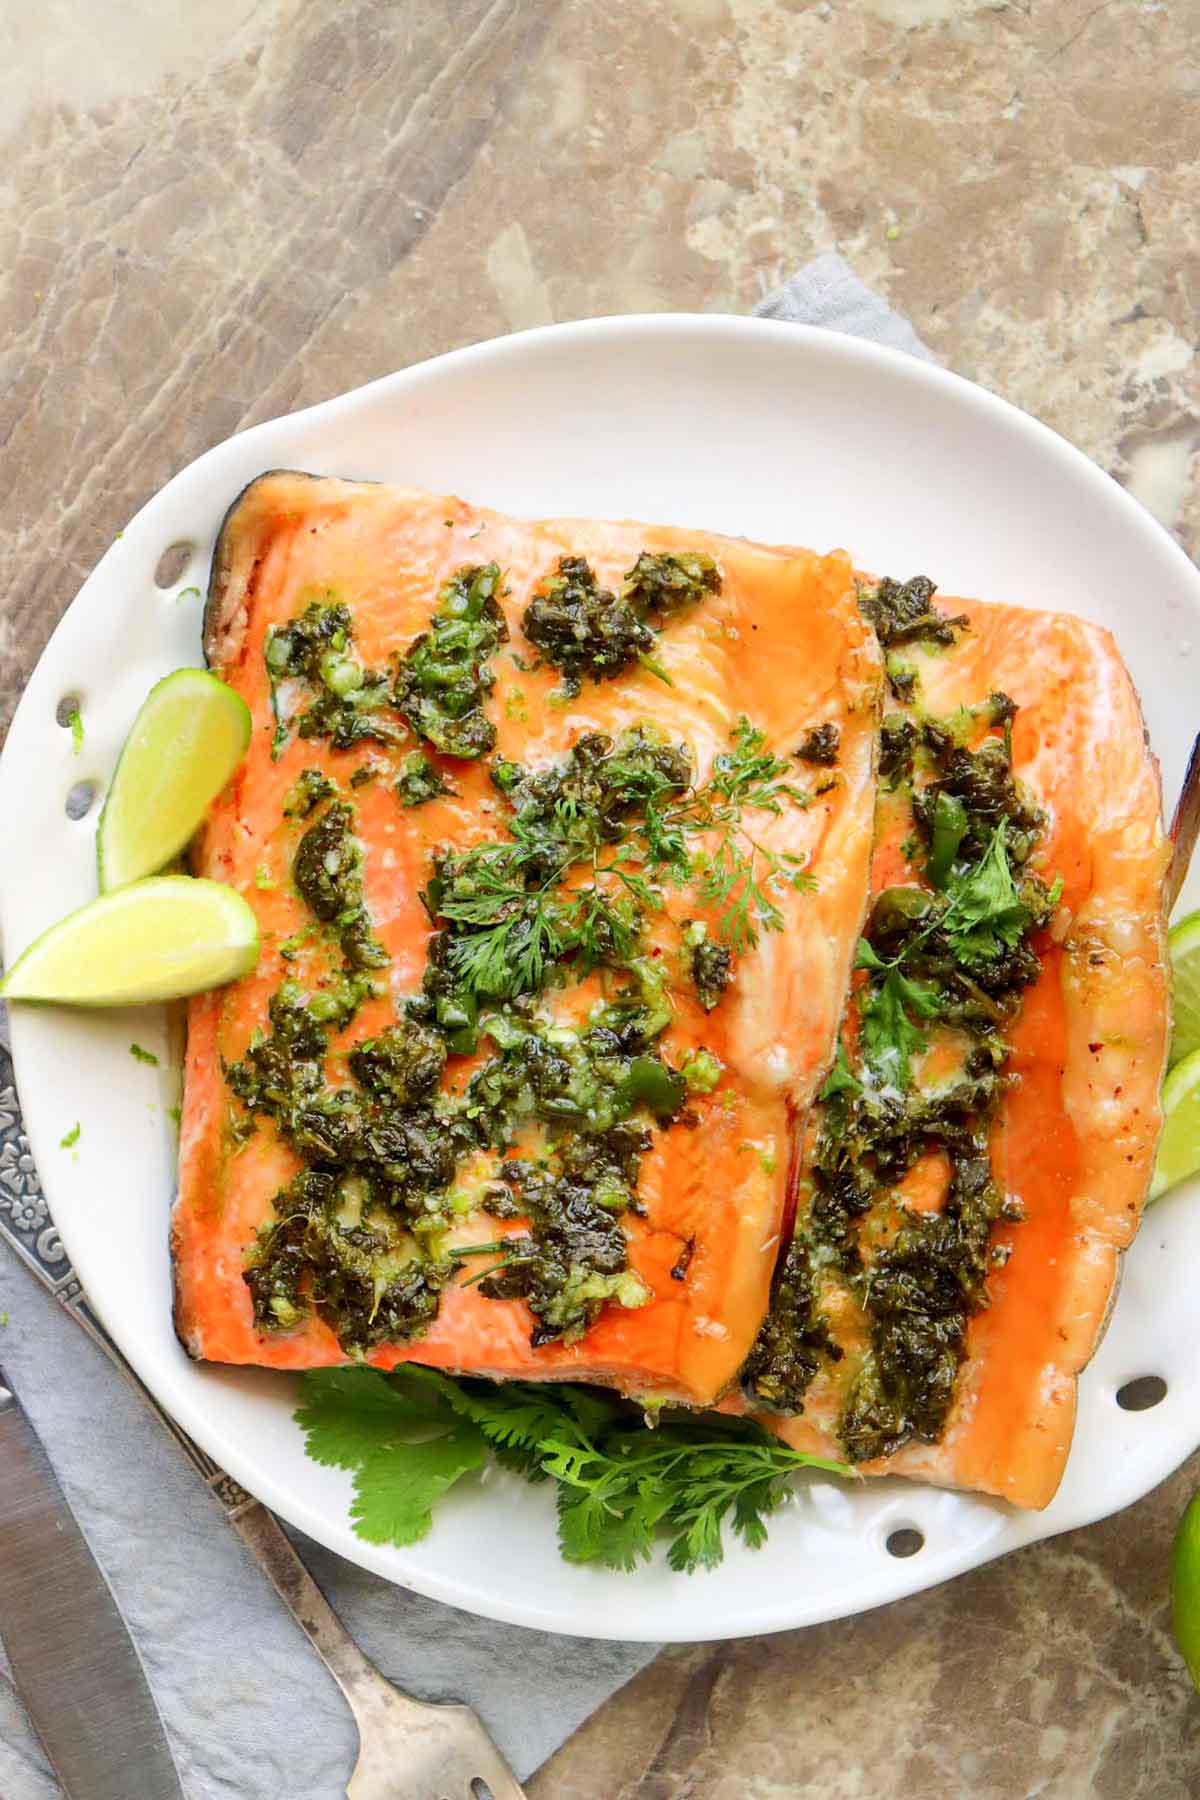 Salmon fillets on a plate with lime wedges.